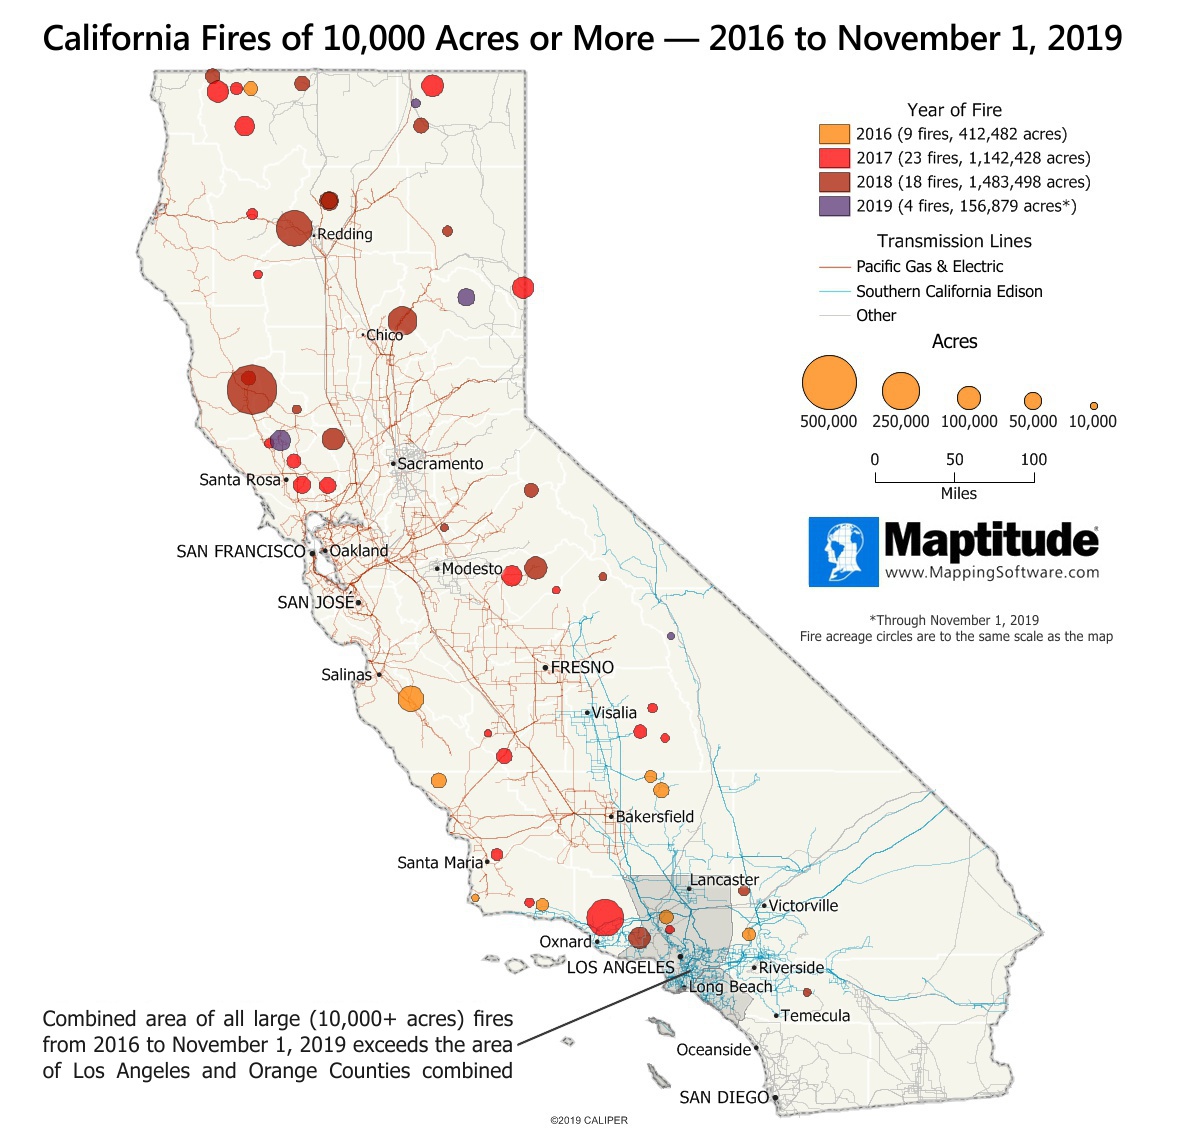 Maptitude mapping software map infographic of largest California wildfires from 2016 to November 1, 2019